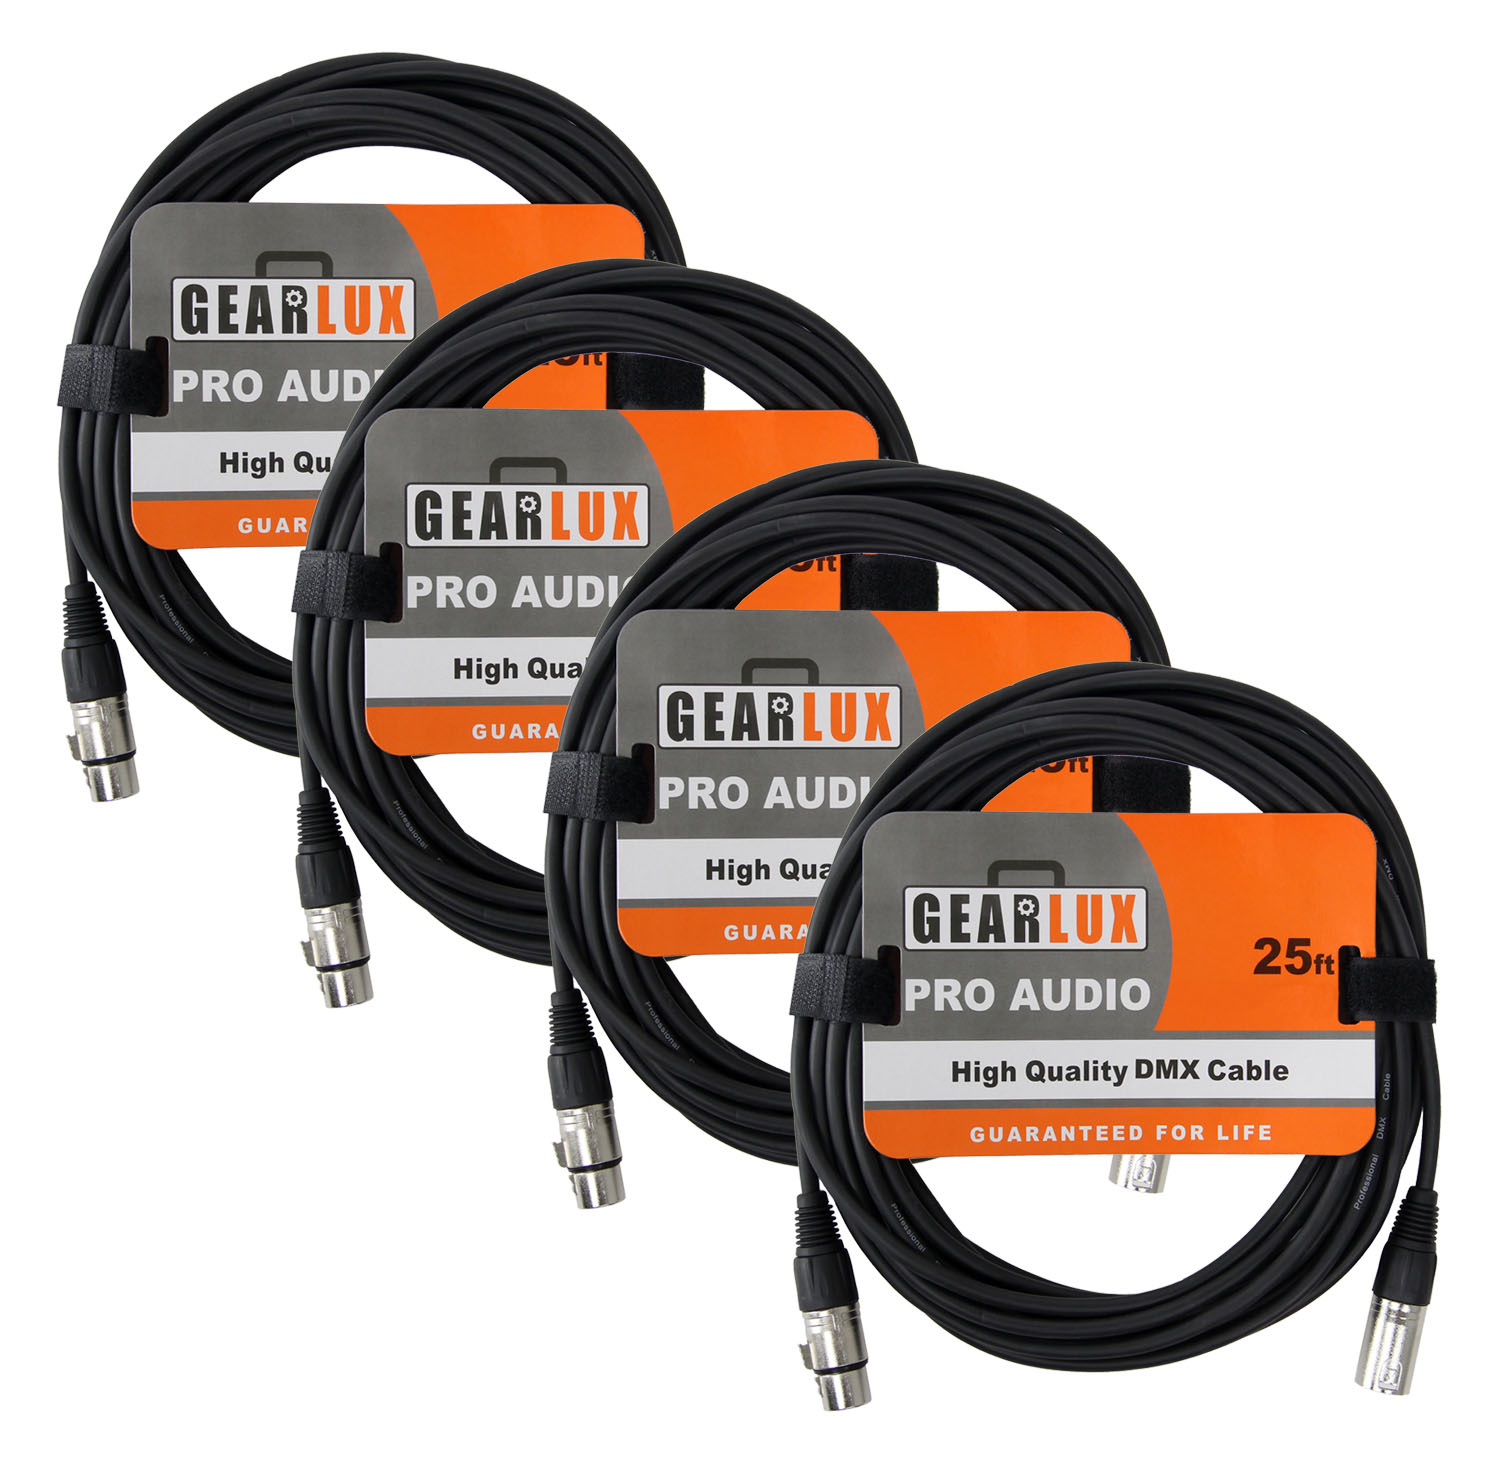 Gearlux 25-Foot 3-Pin Male-to-Female DMX Cable - 4 Pack